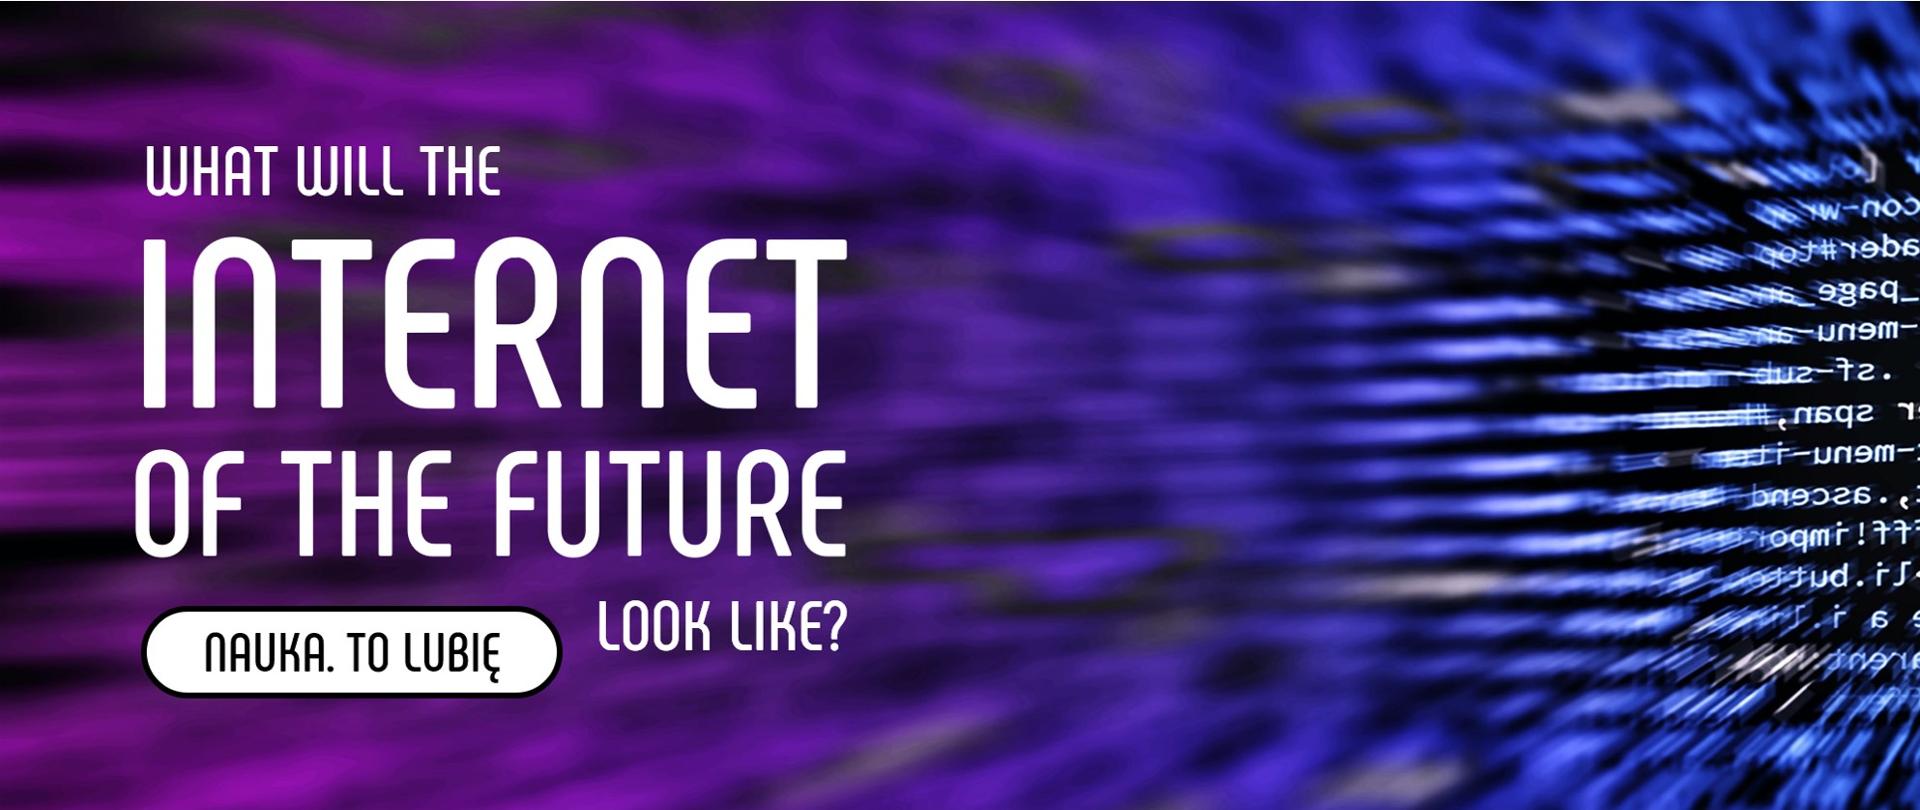 what will the internet of the future look like?